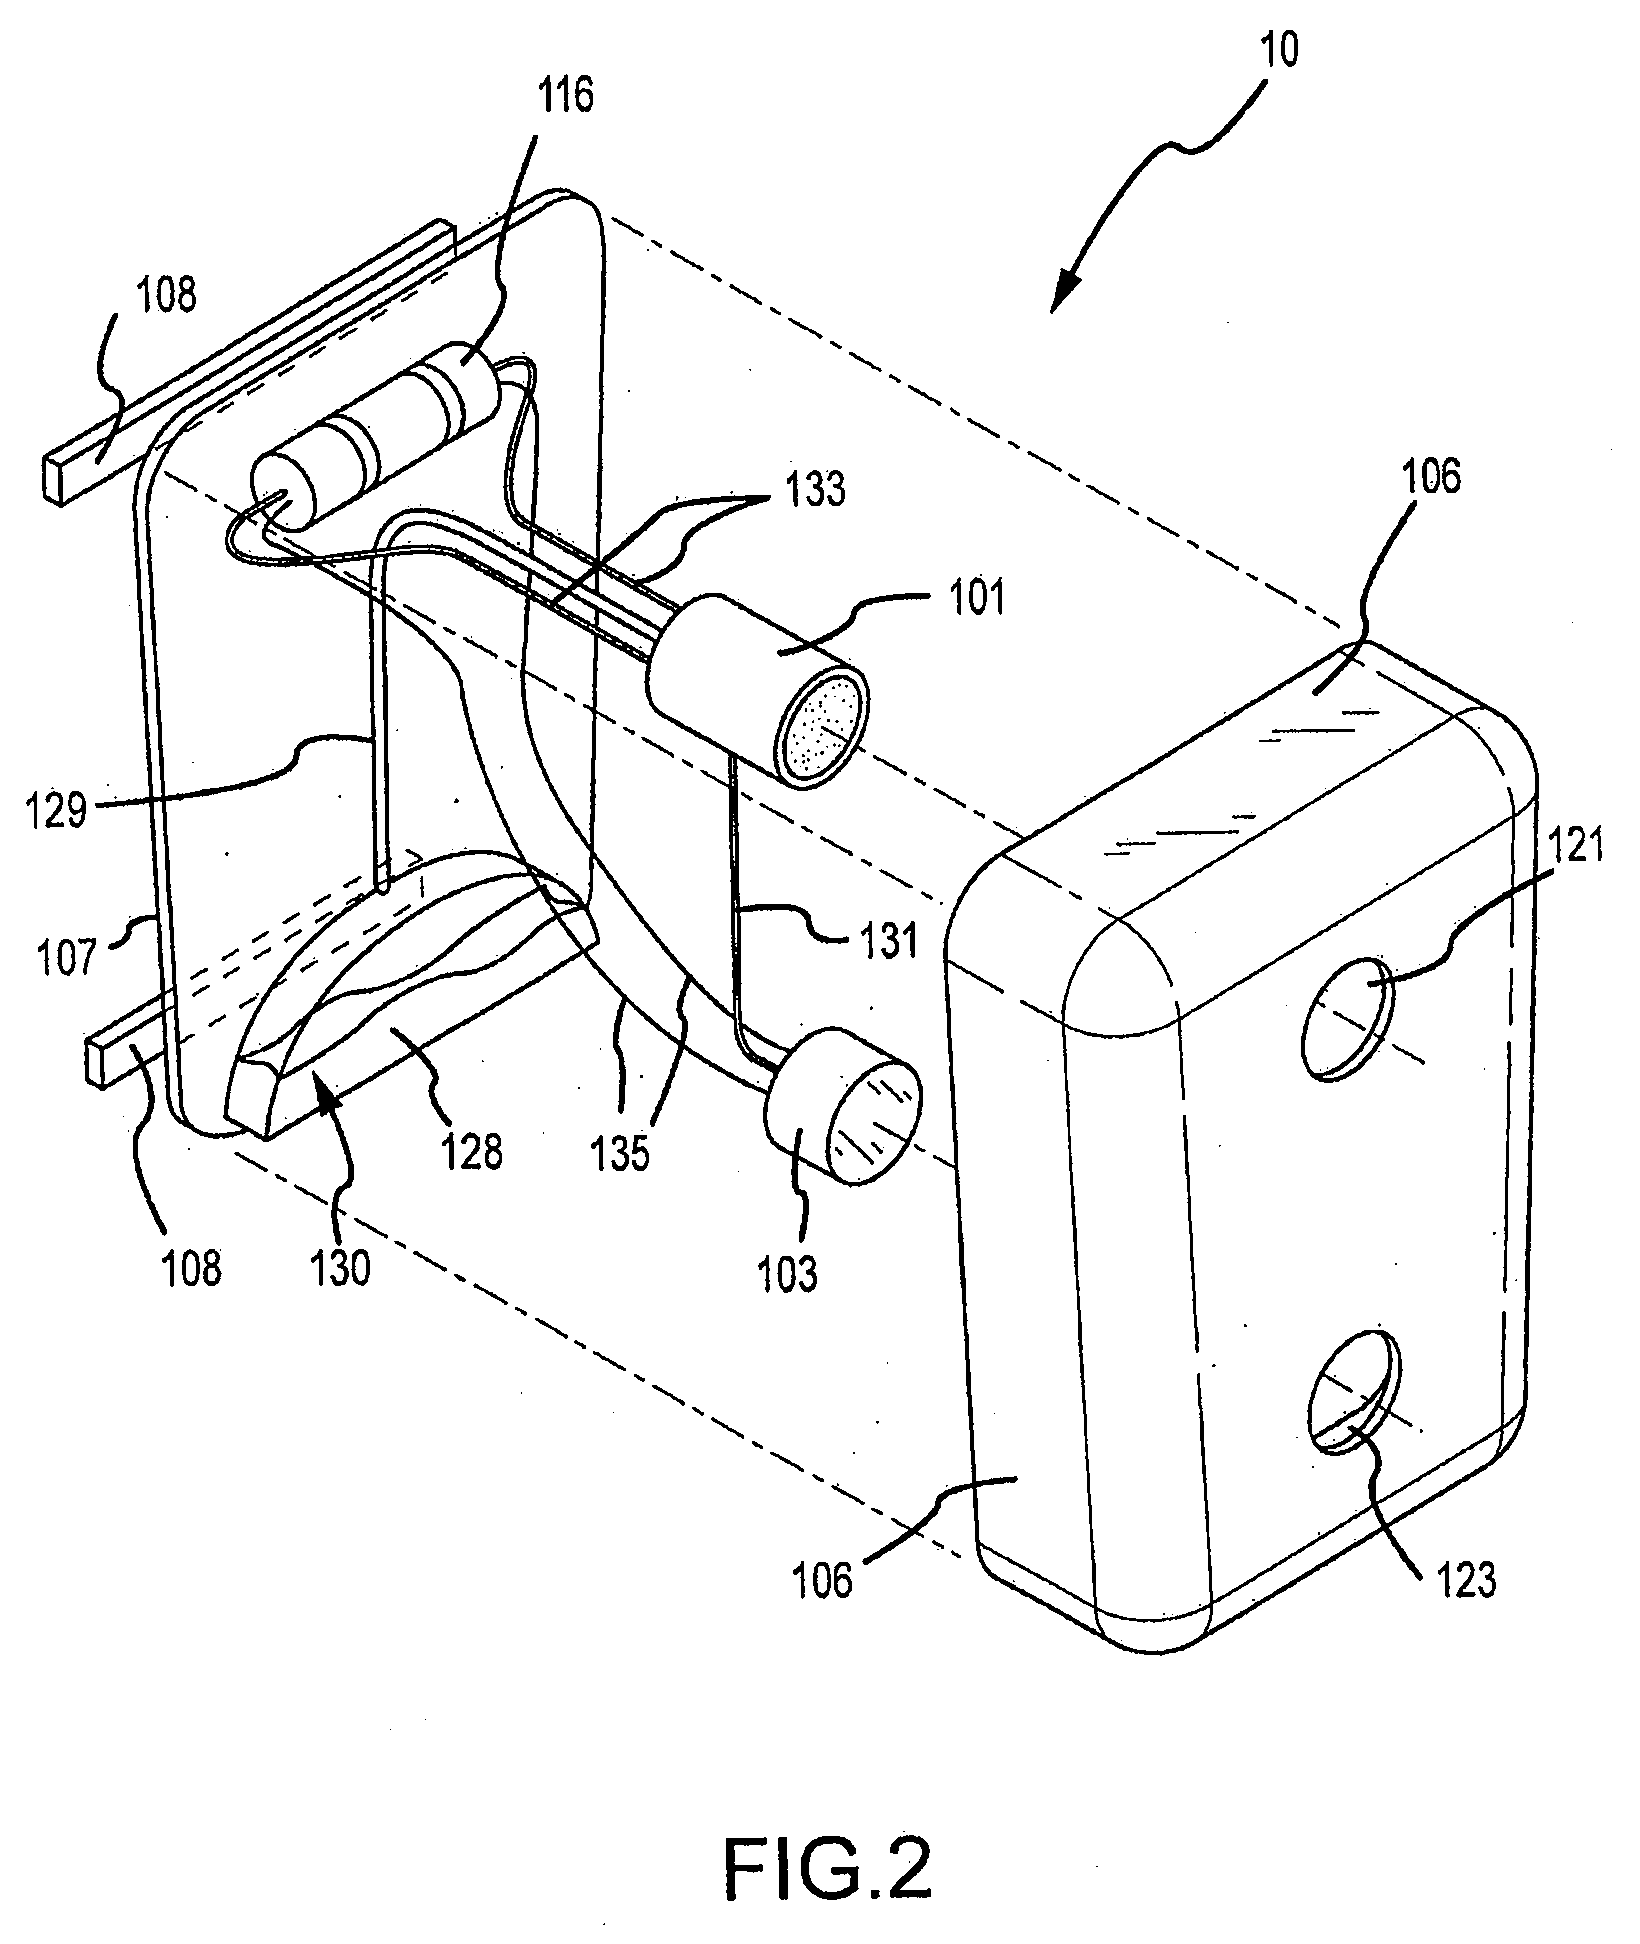 Apparatus and methods for treating fabrics in a laundry dryer